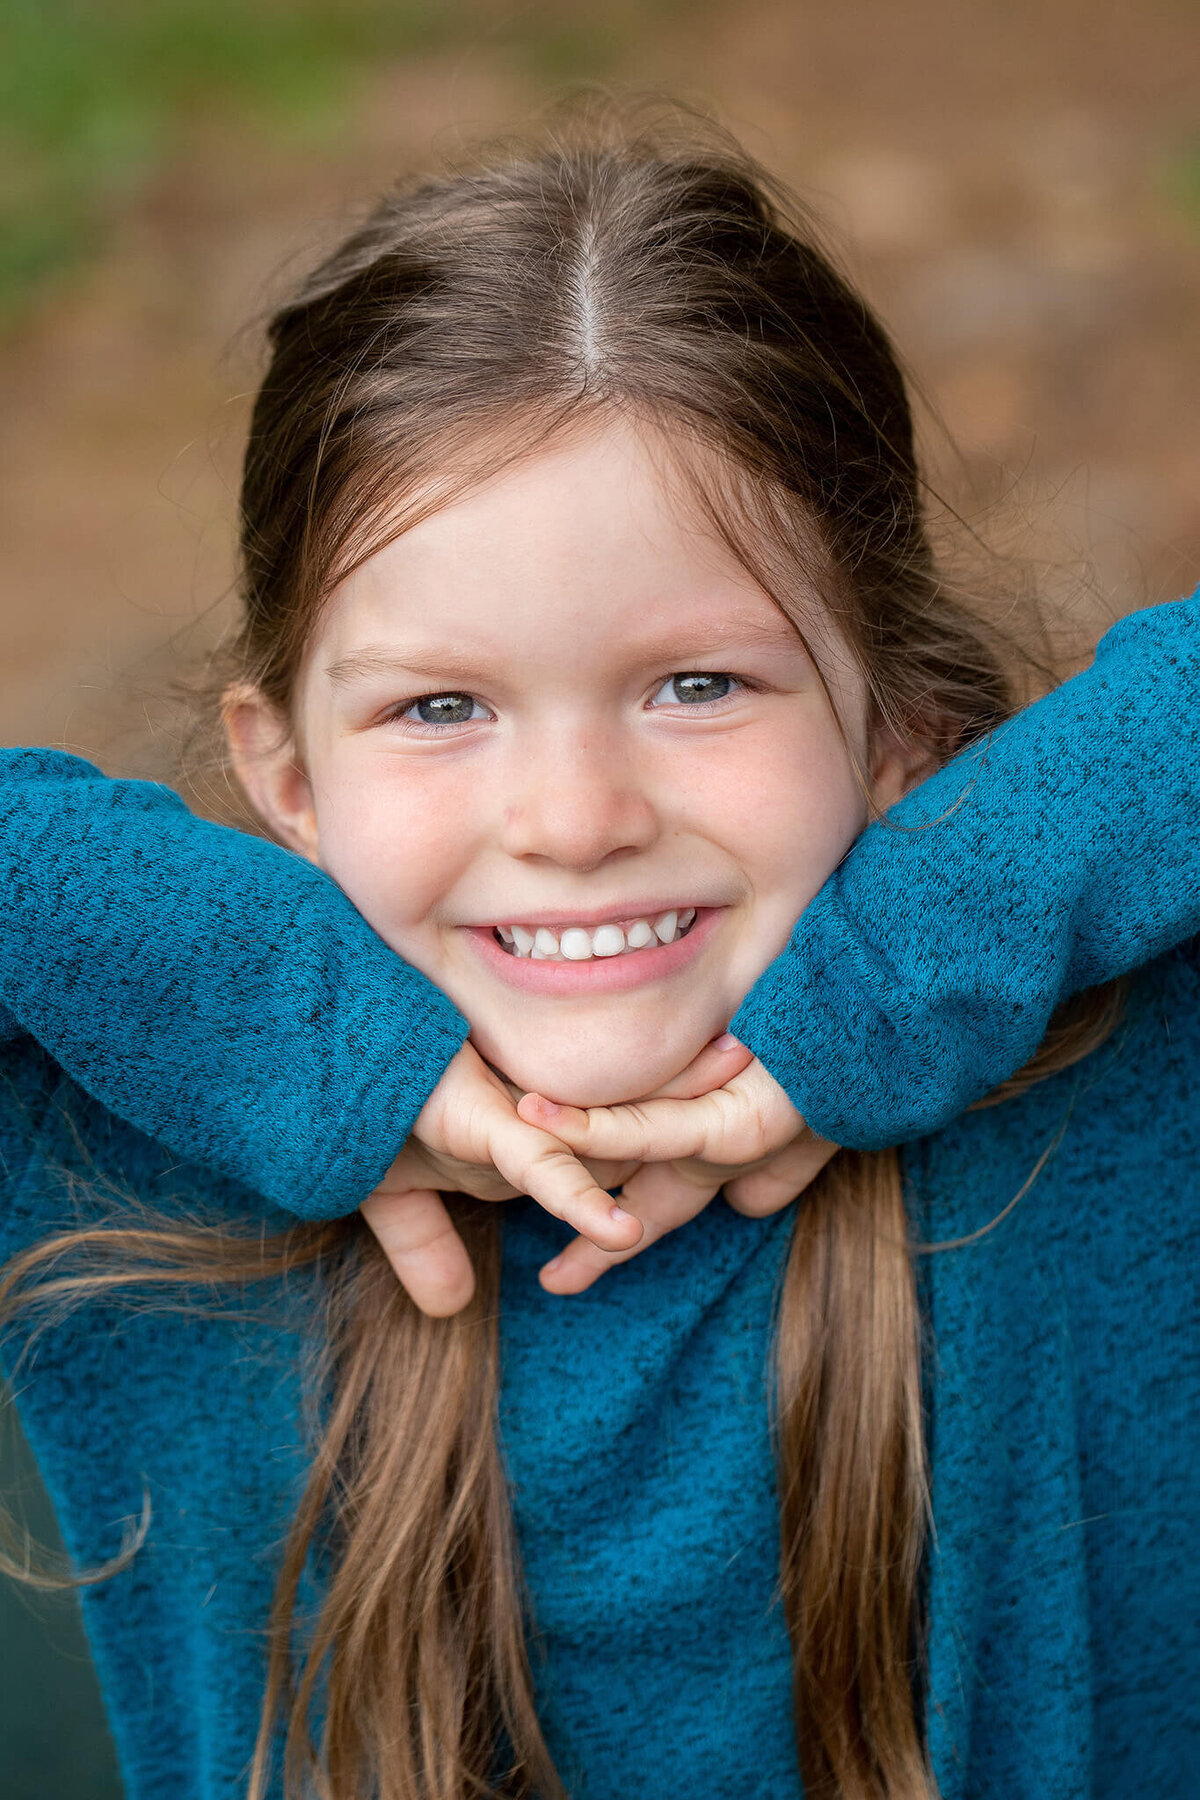 My daughter wearing a blue sweater and smiling with her hands under her chin.